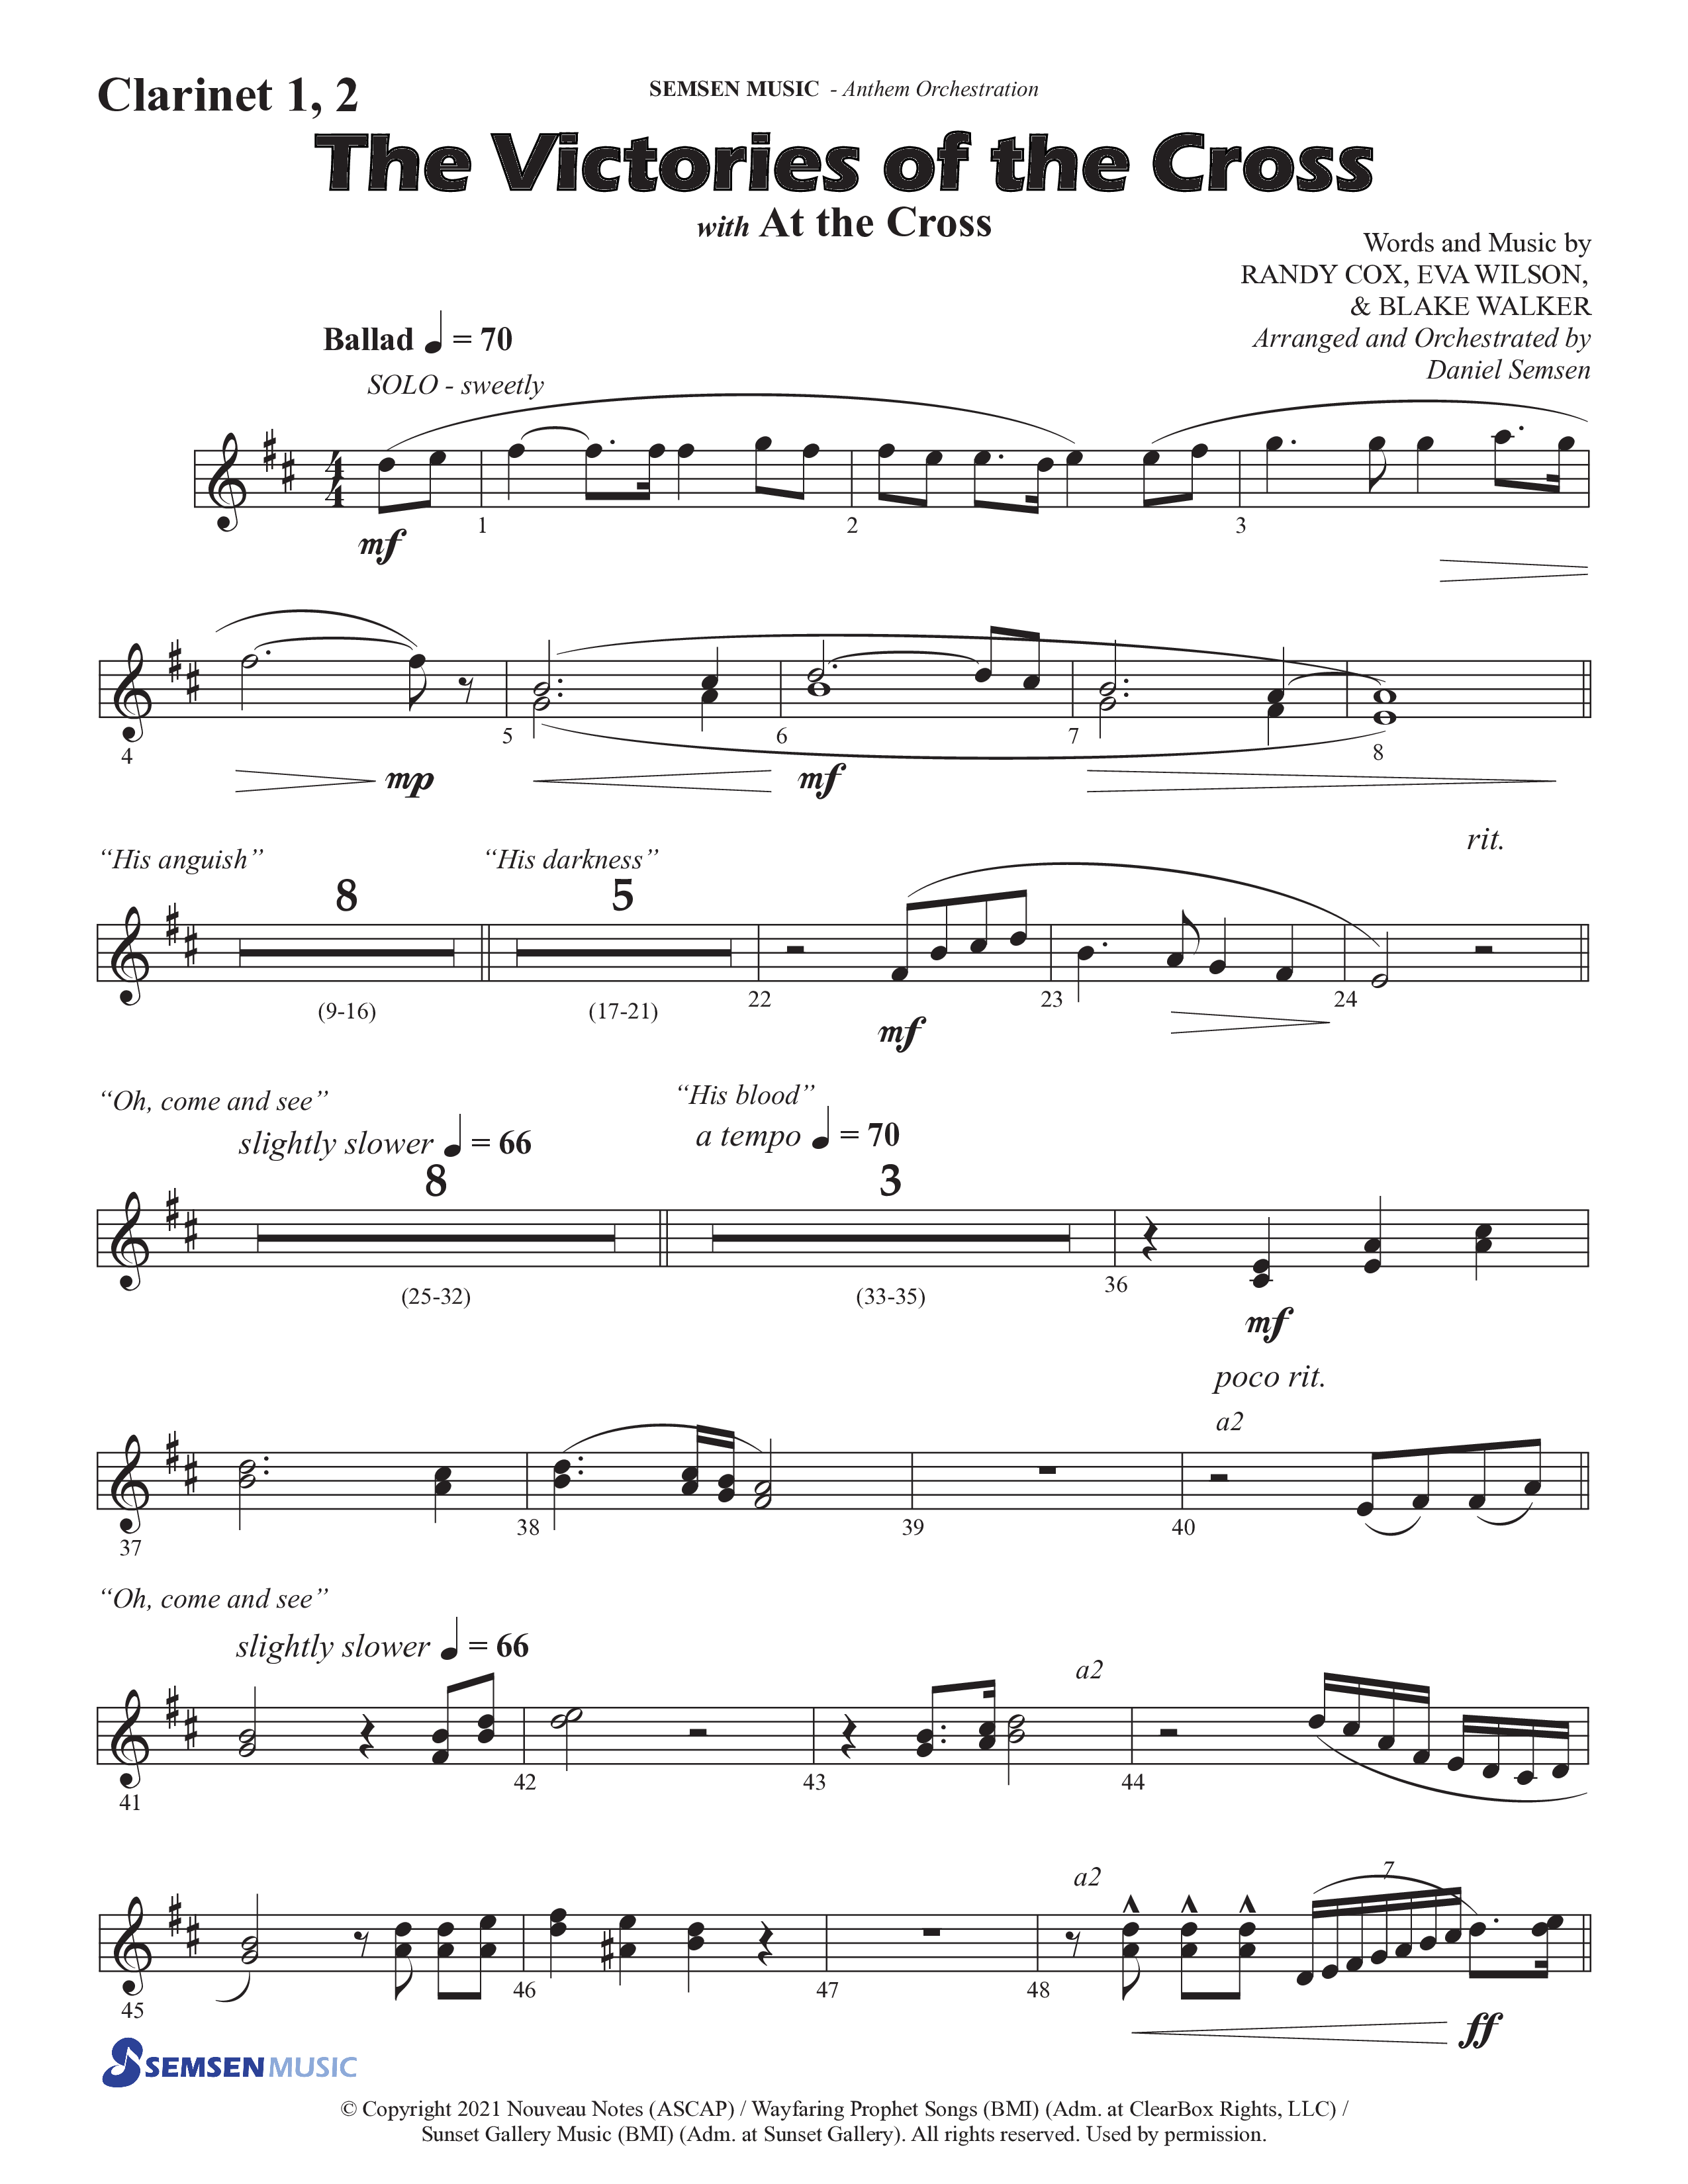 The Victories Of The Cross (with At The Cross) (Choral Anthem SATB) Clarinet 1/2 (Semsen Music / Arr. Daniel Semsen)